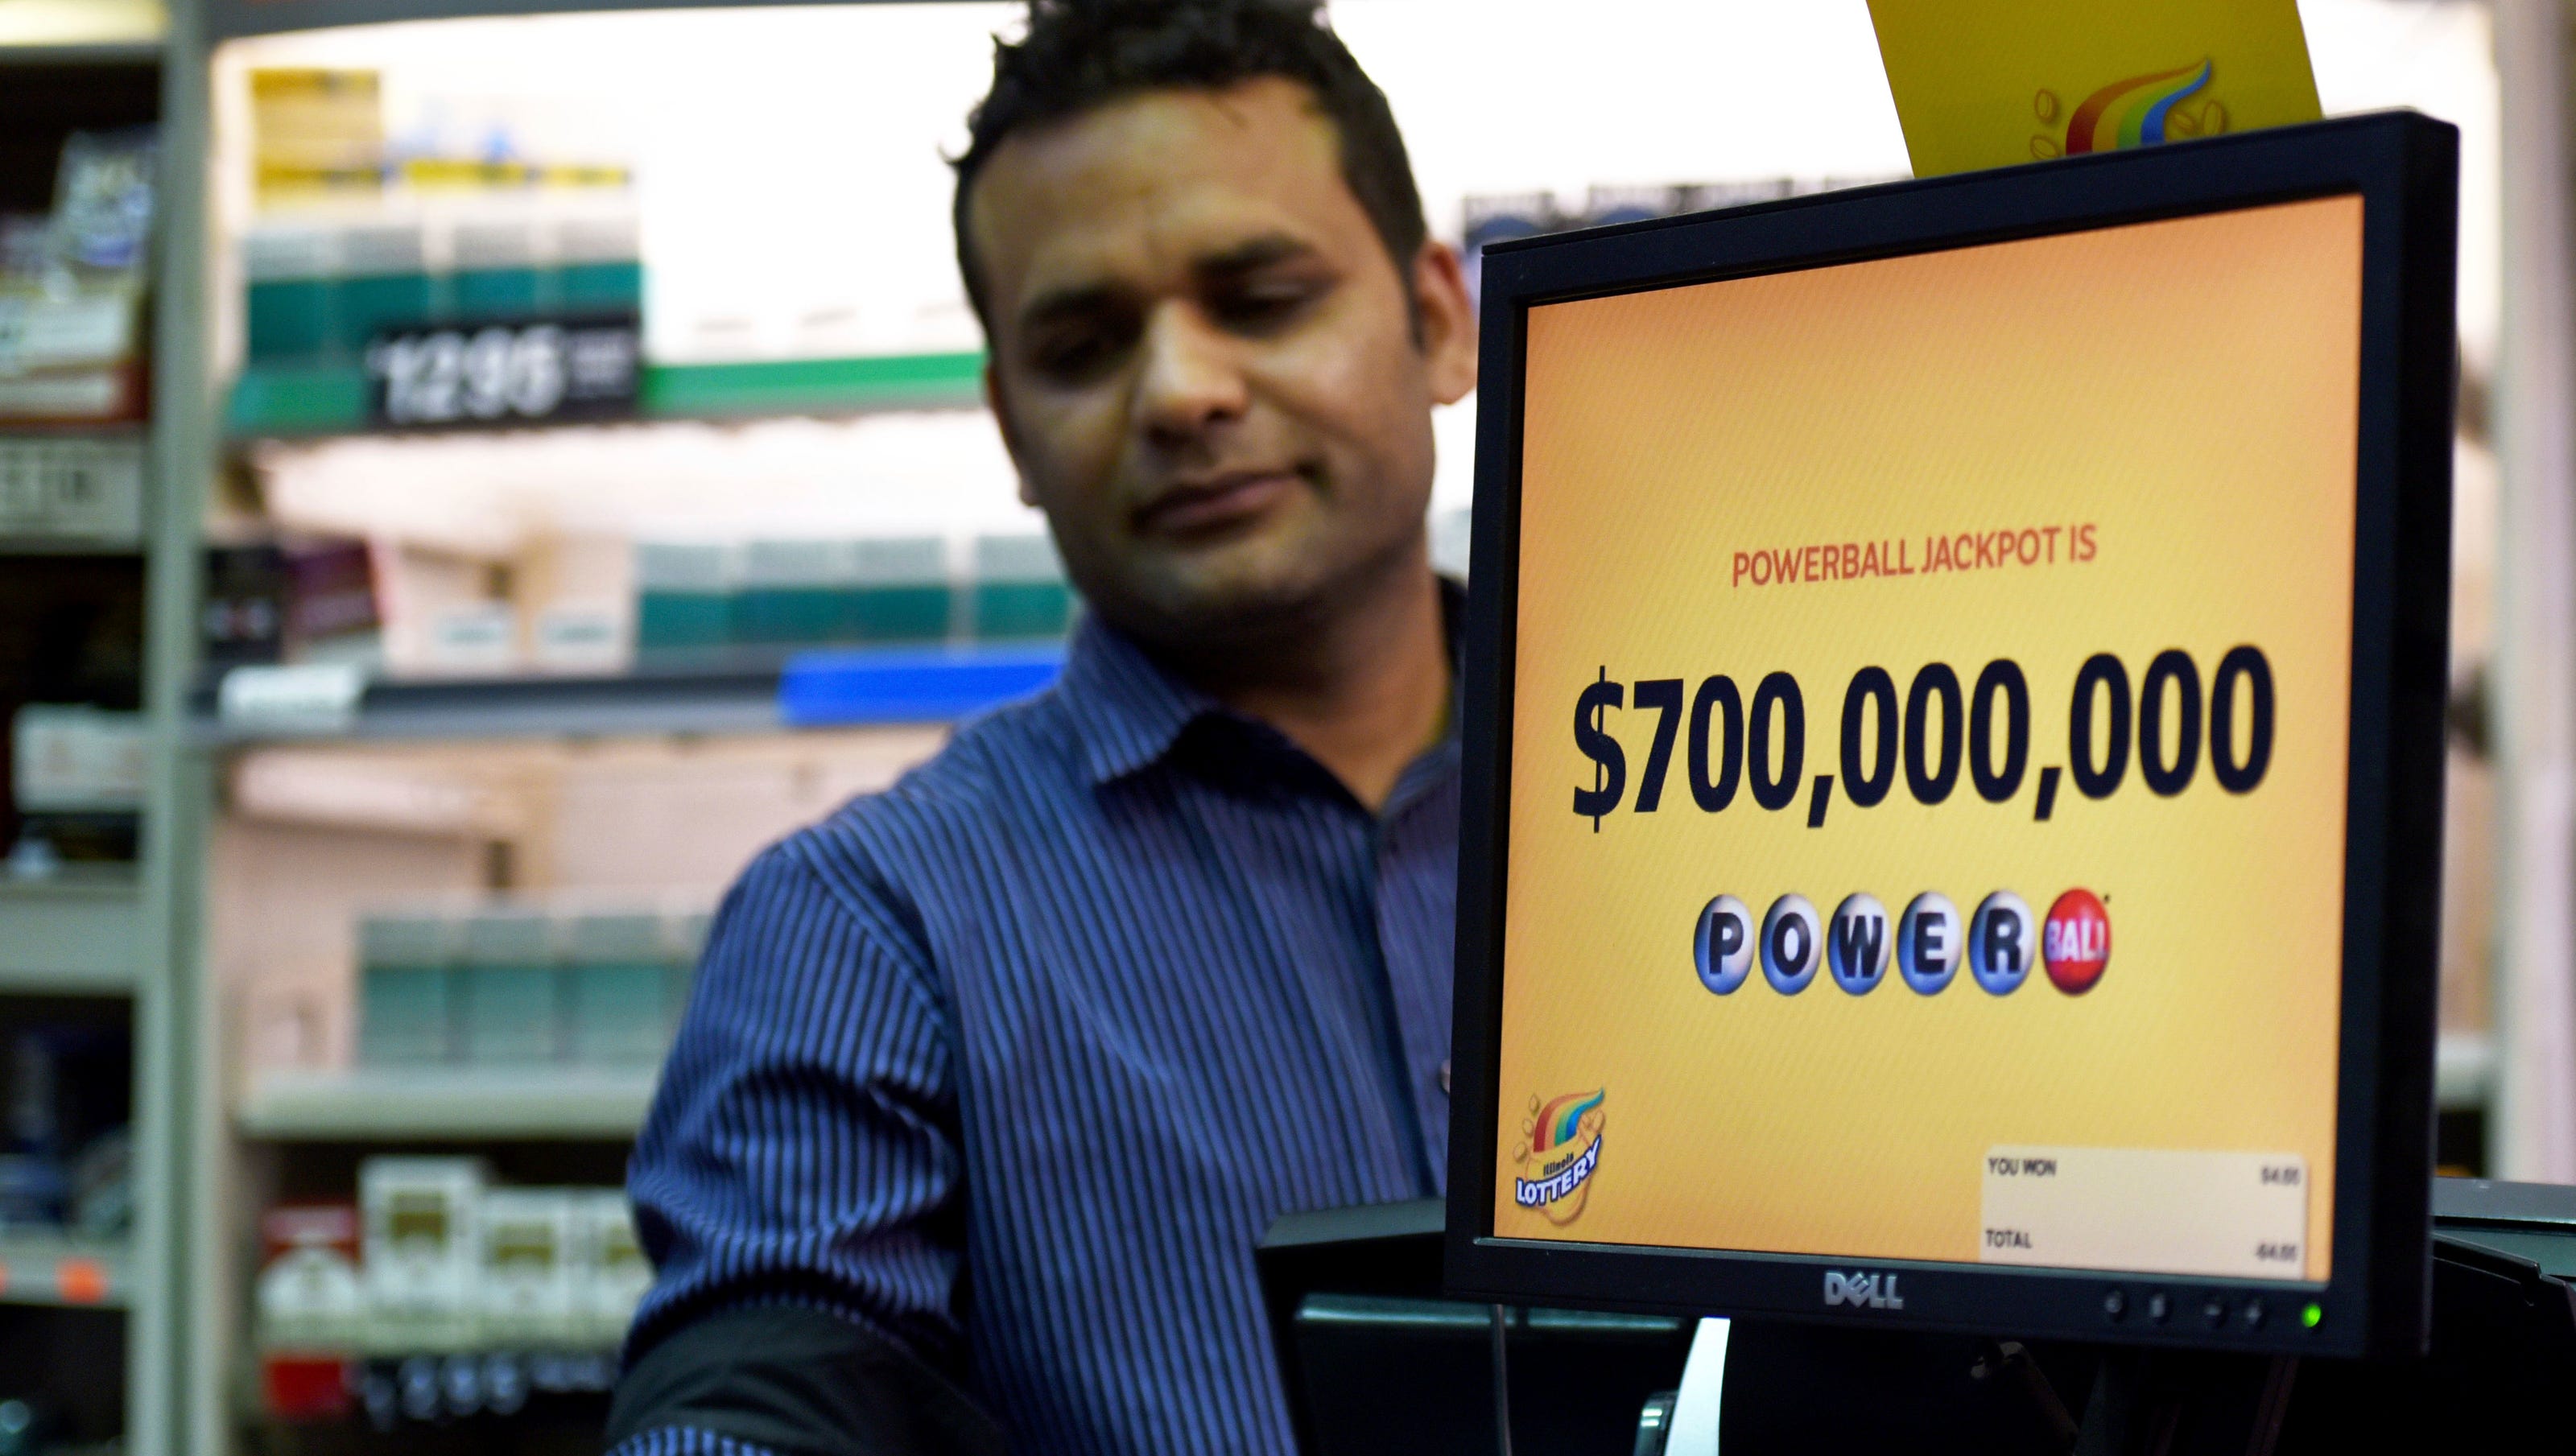 Here are Wednesday's Powerball numbers